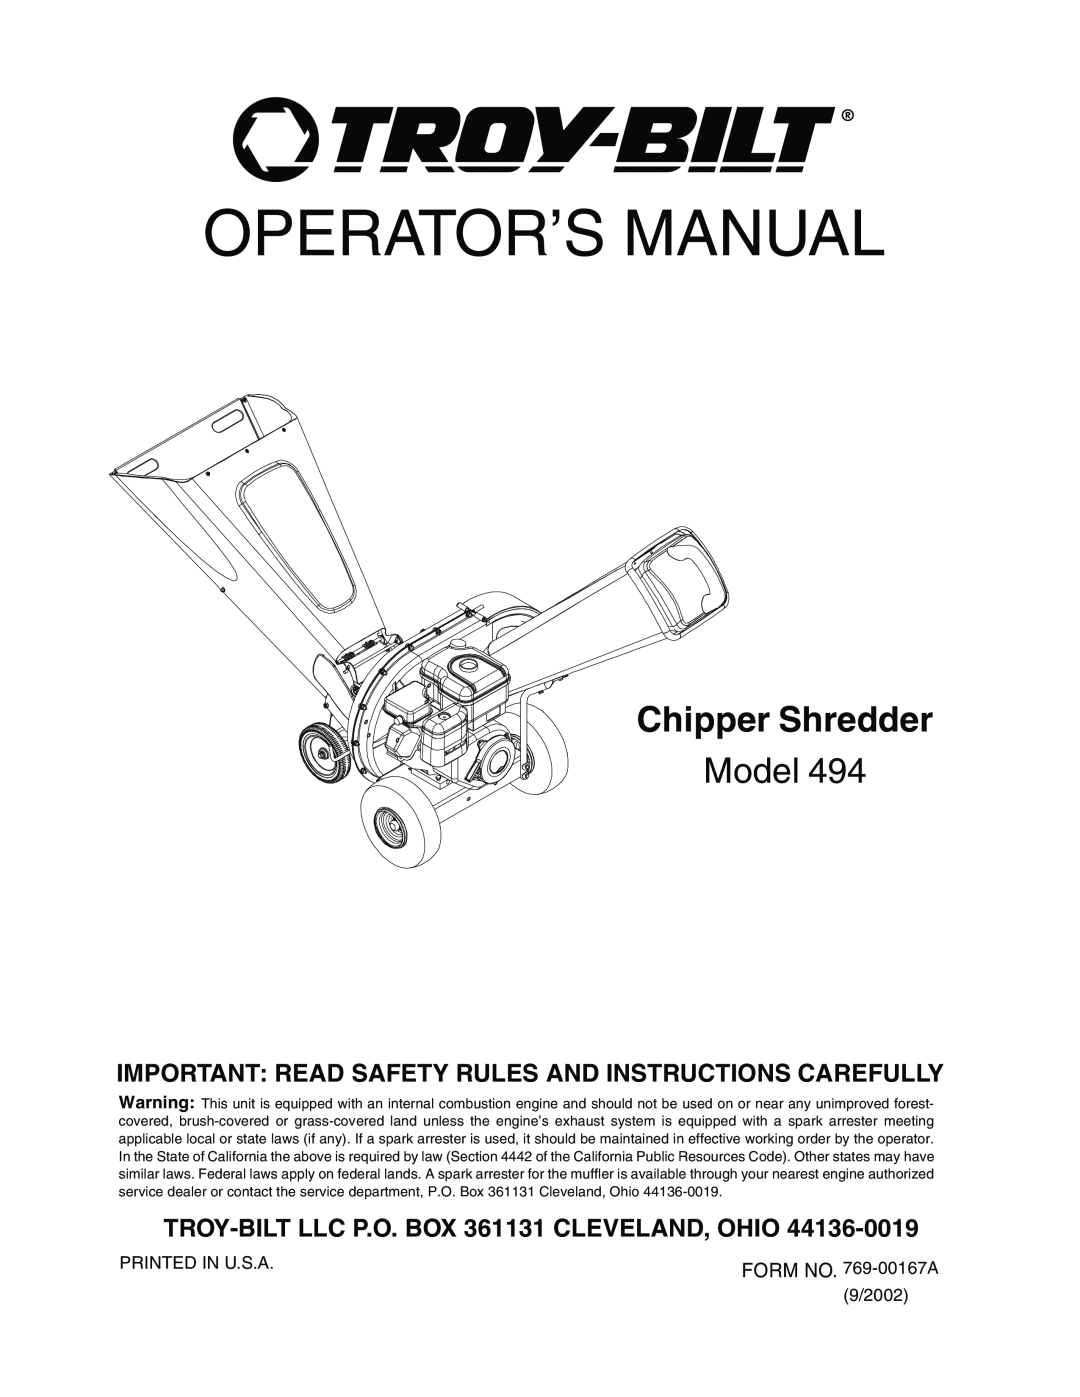 Troy-Bilt 494 manual Operator’S Manual, Chipper Shredder, Model, Important Read Safety Rules And Instructions Carefully 